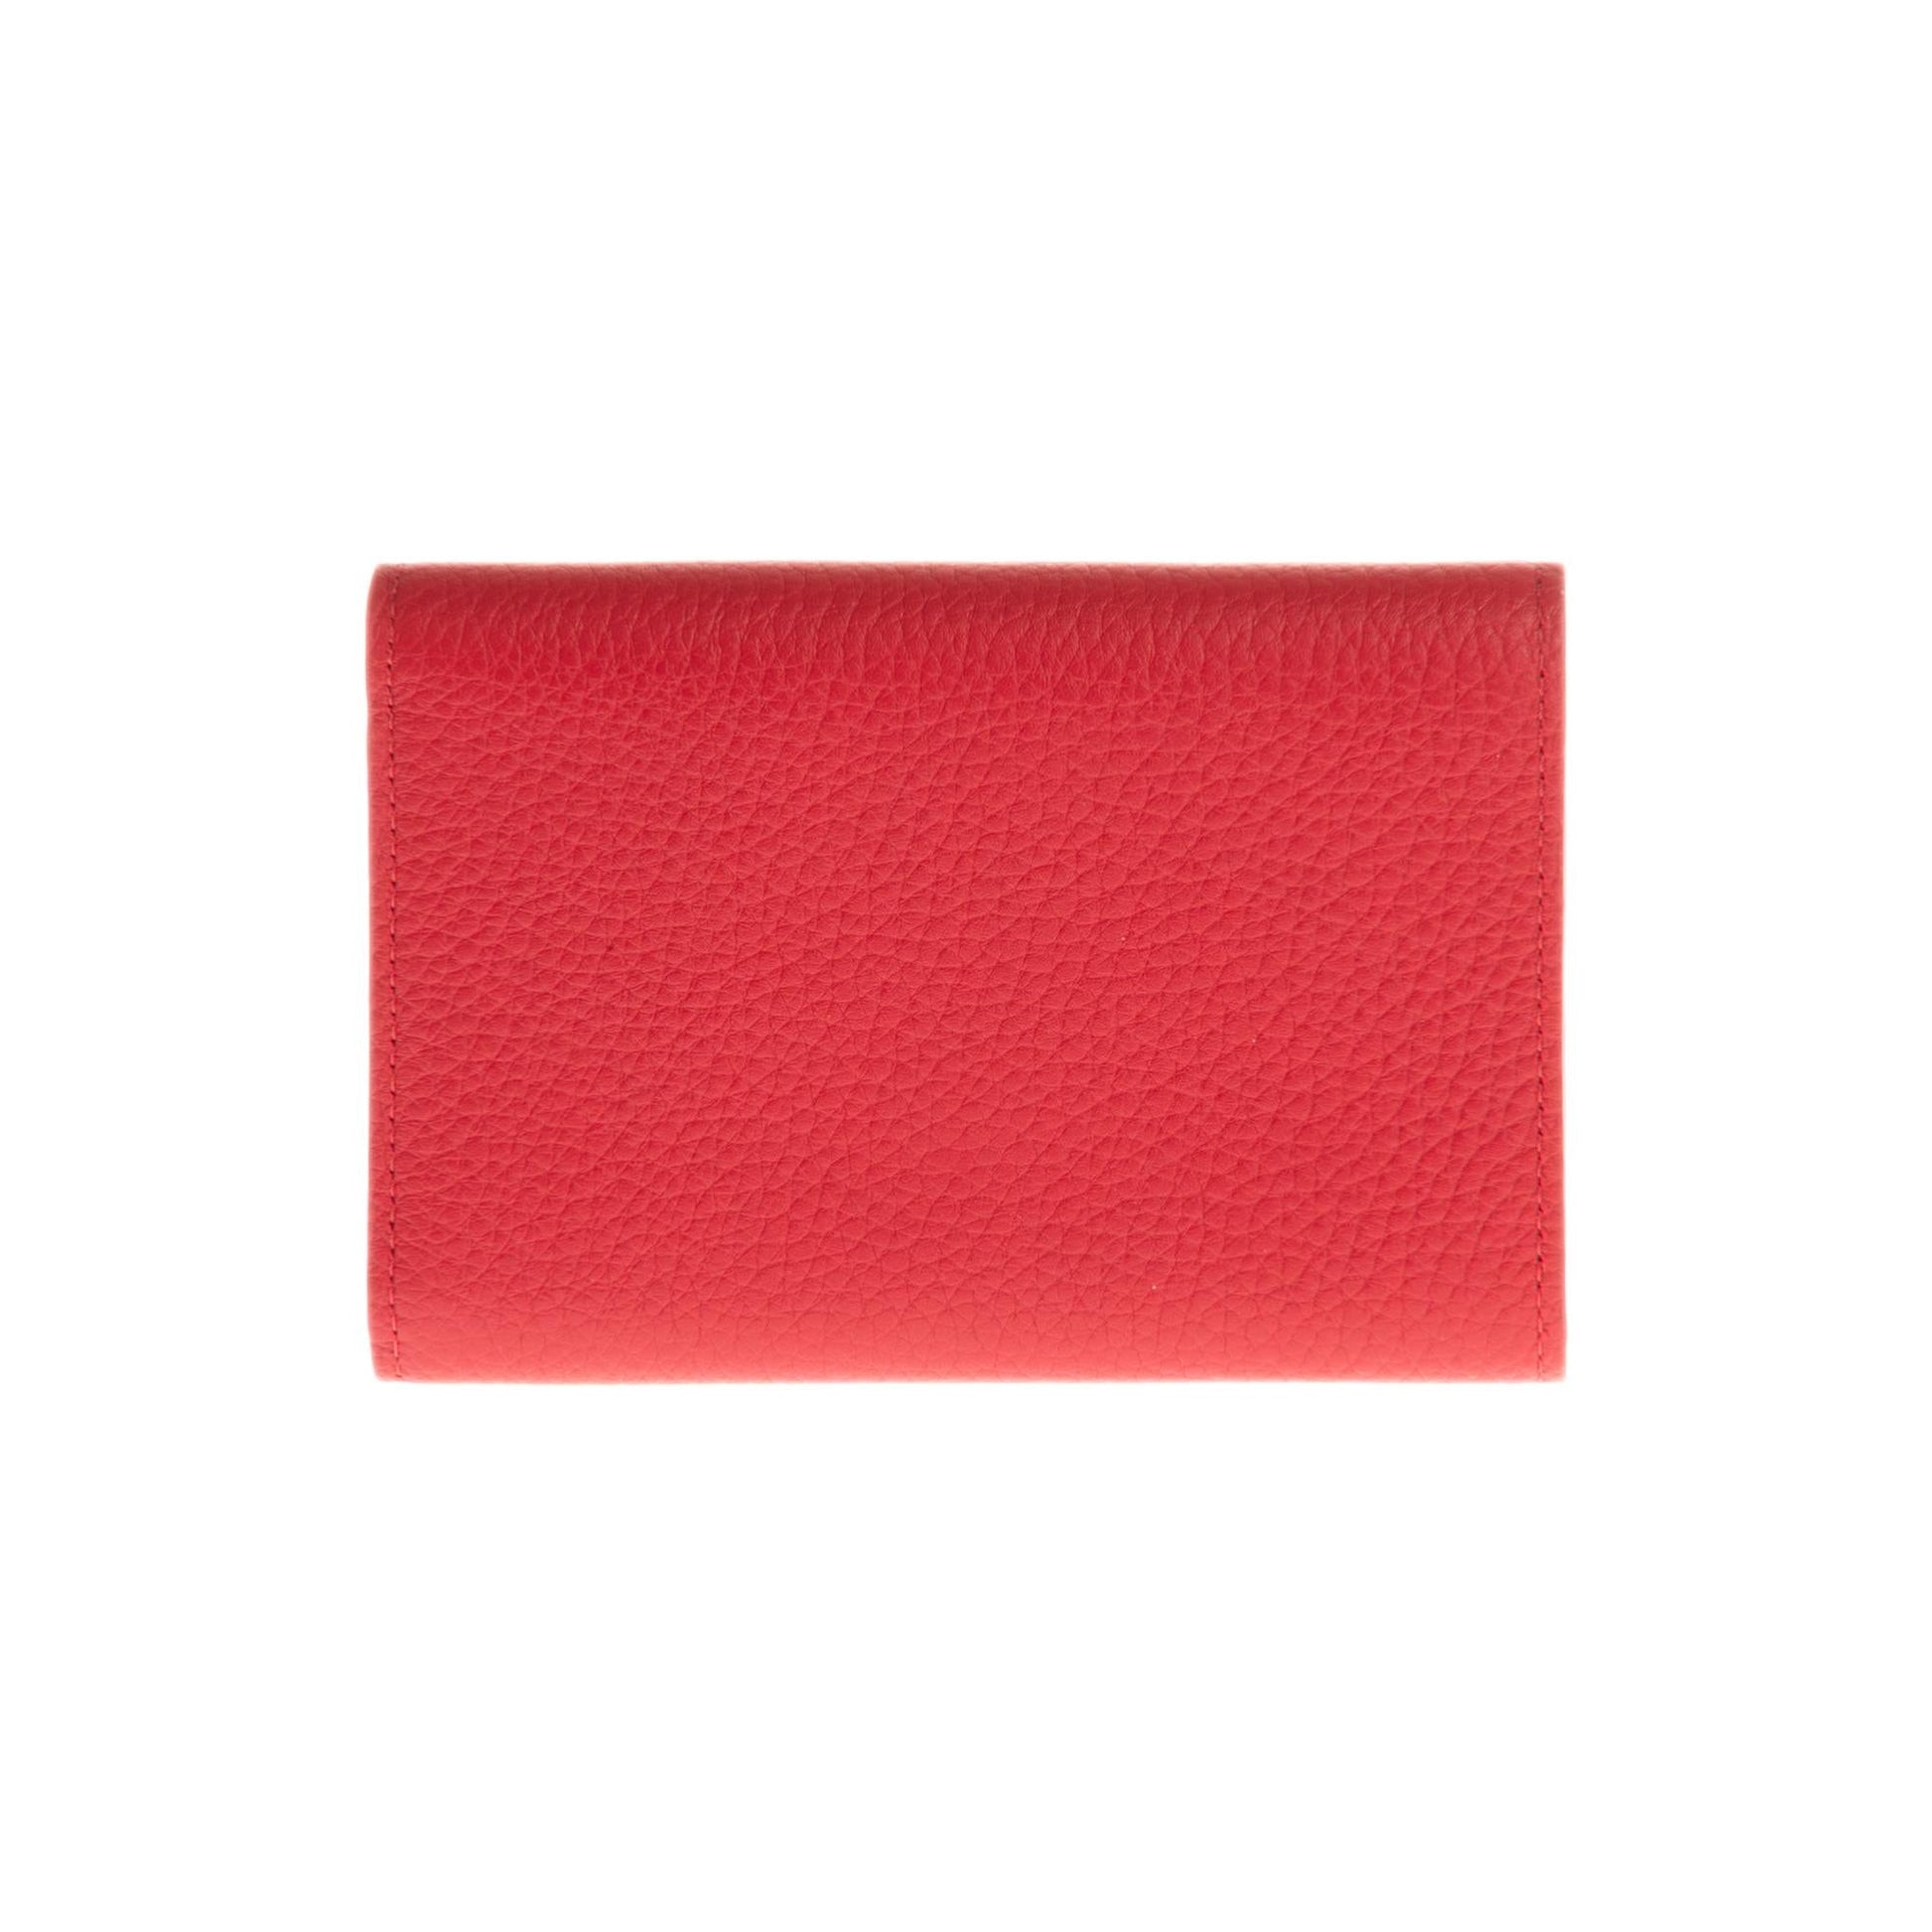 Brand New LV Capucines Compact Wallet in Red ecarlate Taurillon leather